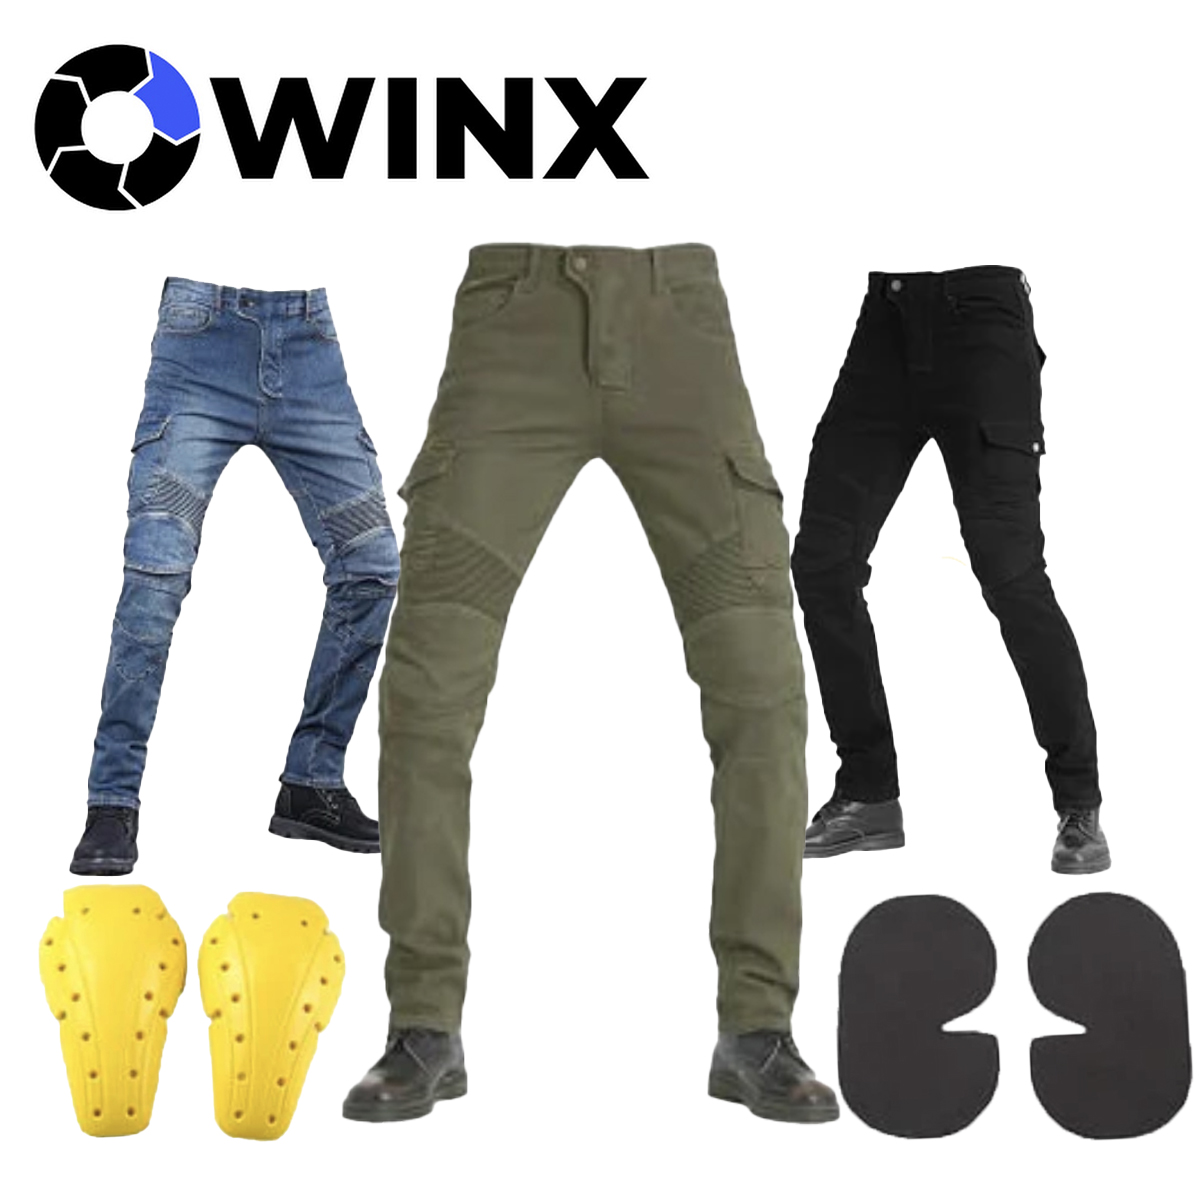 The Ultimate Riding Gear: The Winx Wheels' RideReady Moto Pants  #RideConfidently 